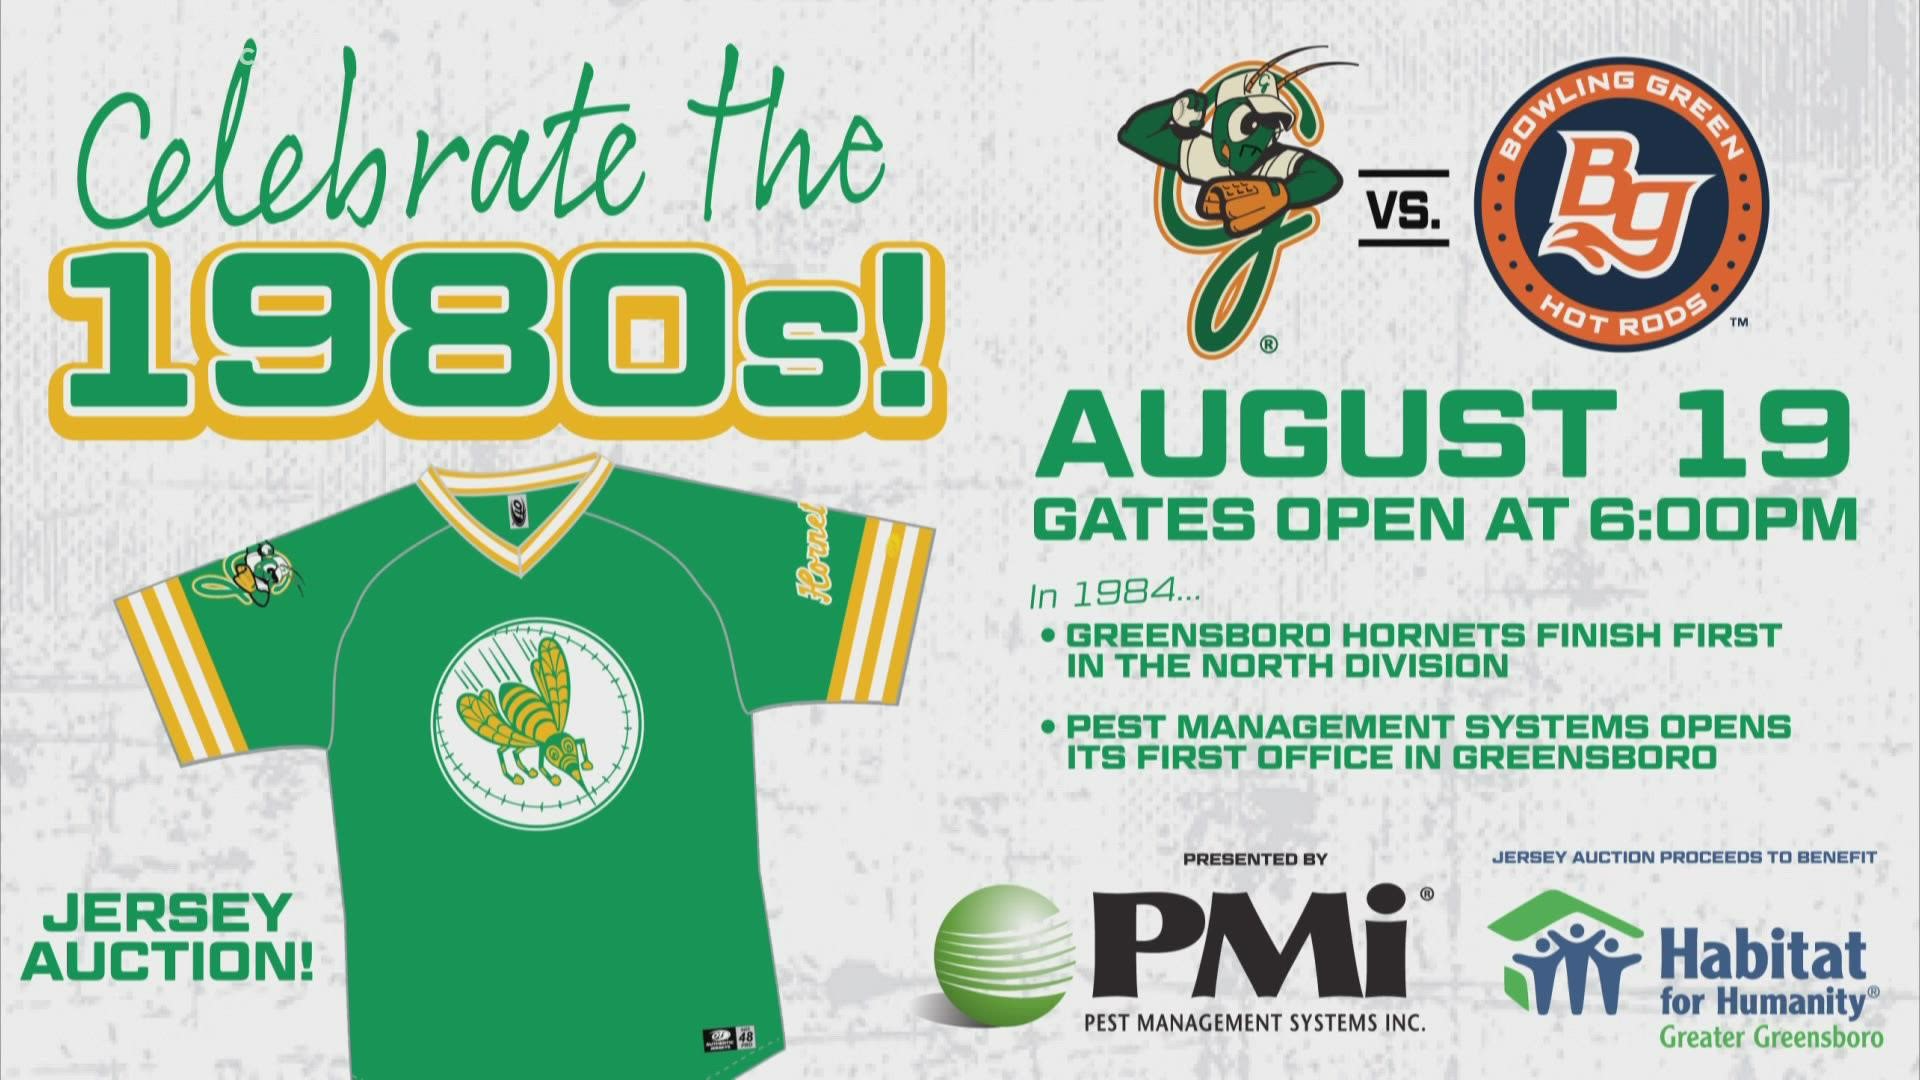 A jersey charity event at the Greensboro Grasshoppers game will benefit Habitat for Humanity.